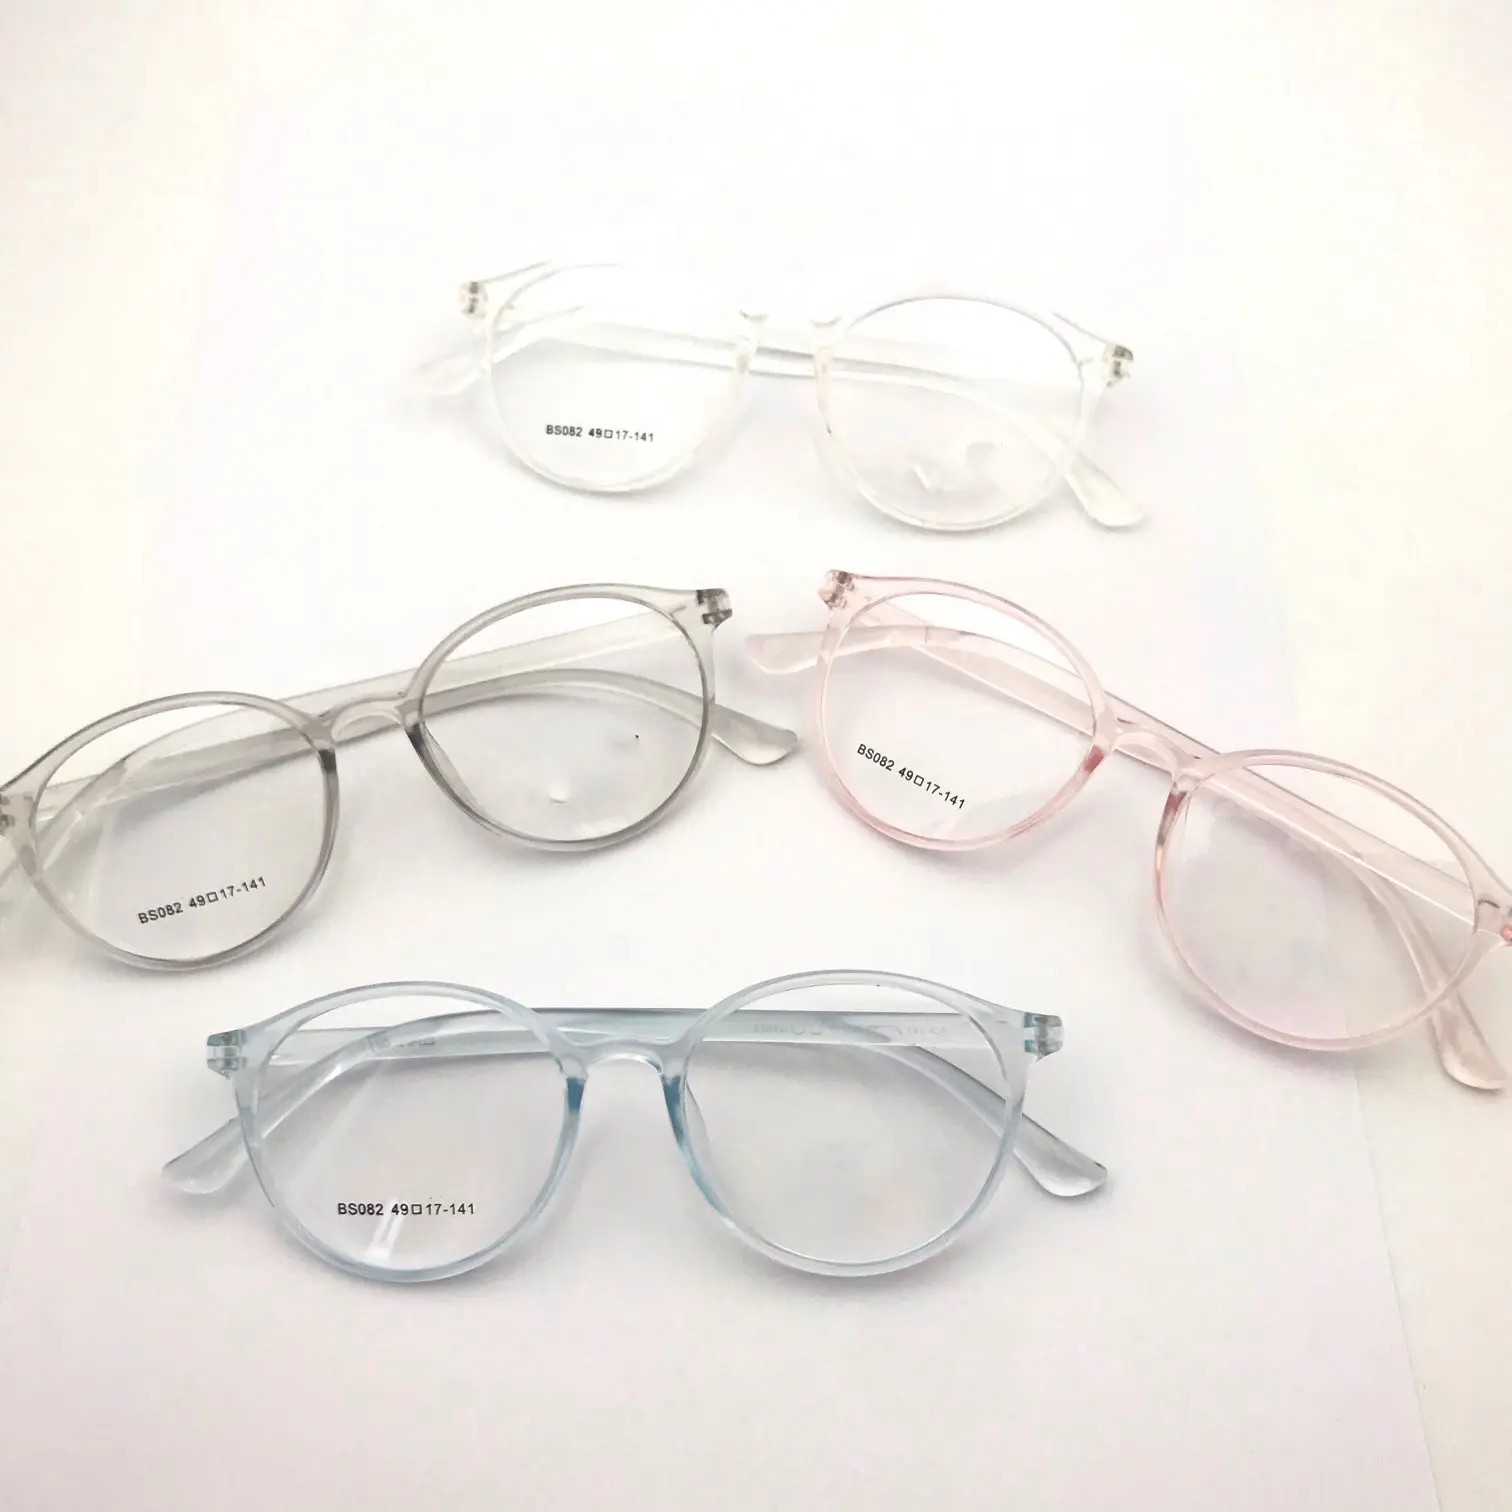 Optic Frames Popular Products Photochromic Glasses Fashion Flexible Hand Made Tr-90 Optical Frame